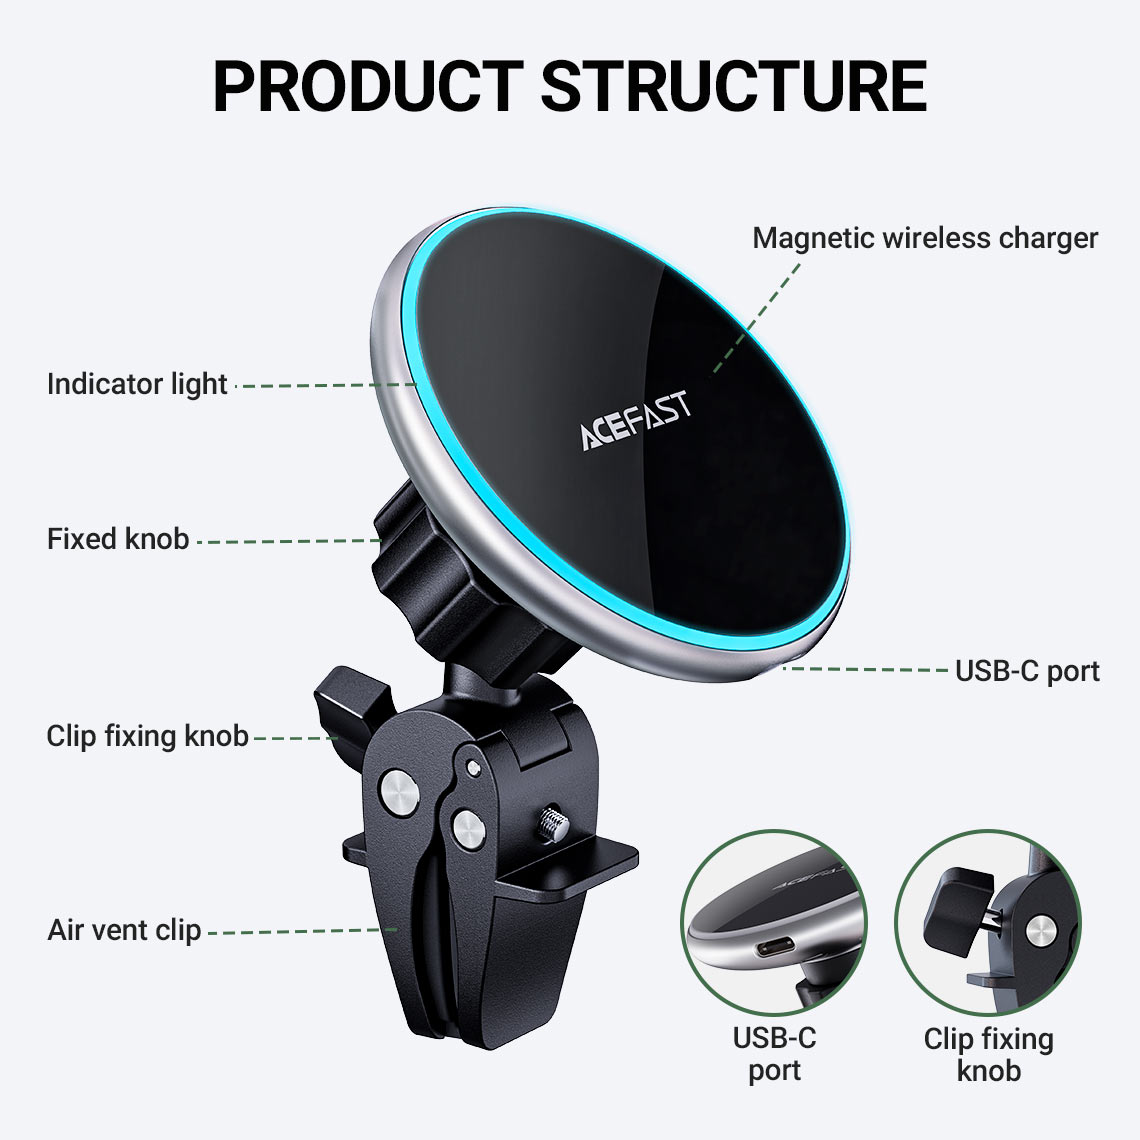 acefast d3 magnetic car holder wireless charger product structure